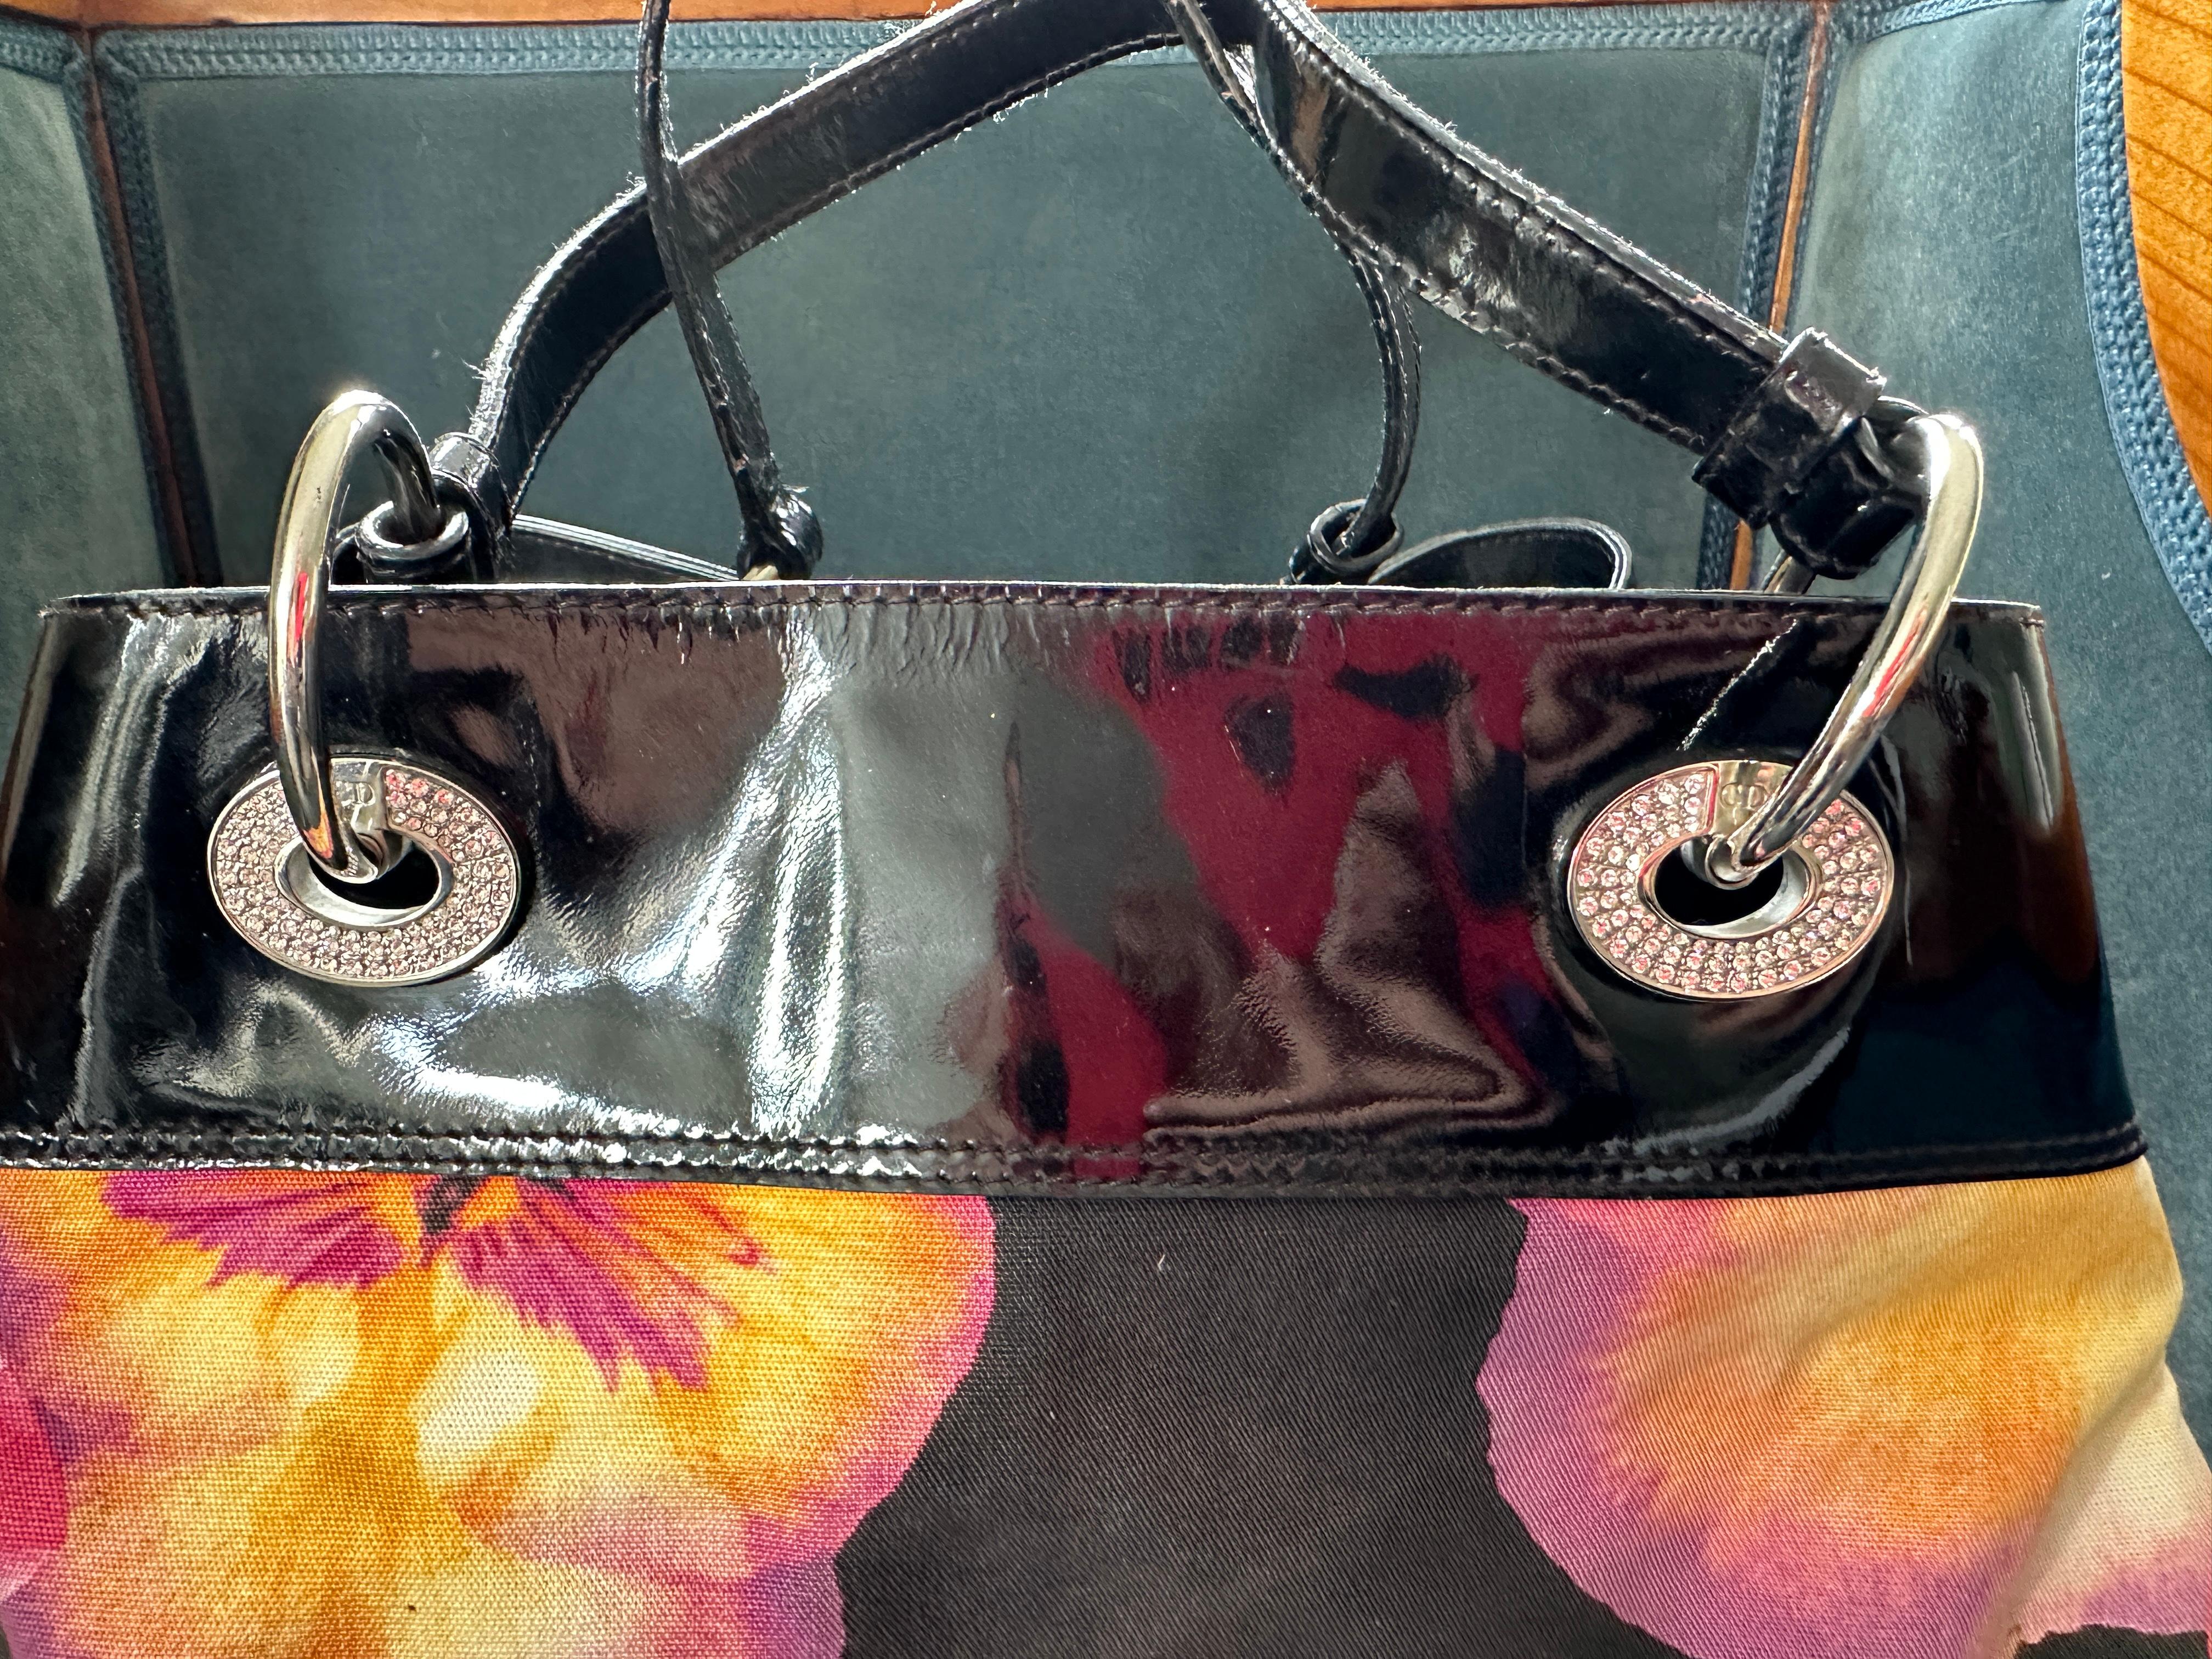 Christian Dior Spring 2005 Surreal Lips and Pansy Print Bag by John Galliano In Good Condition For Sale In Cloverdale, CA